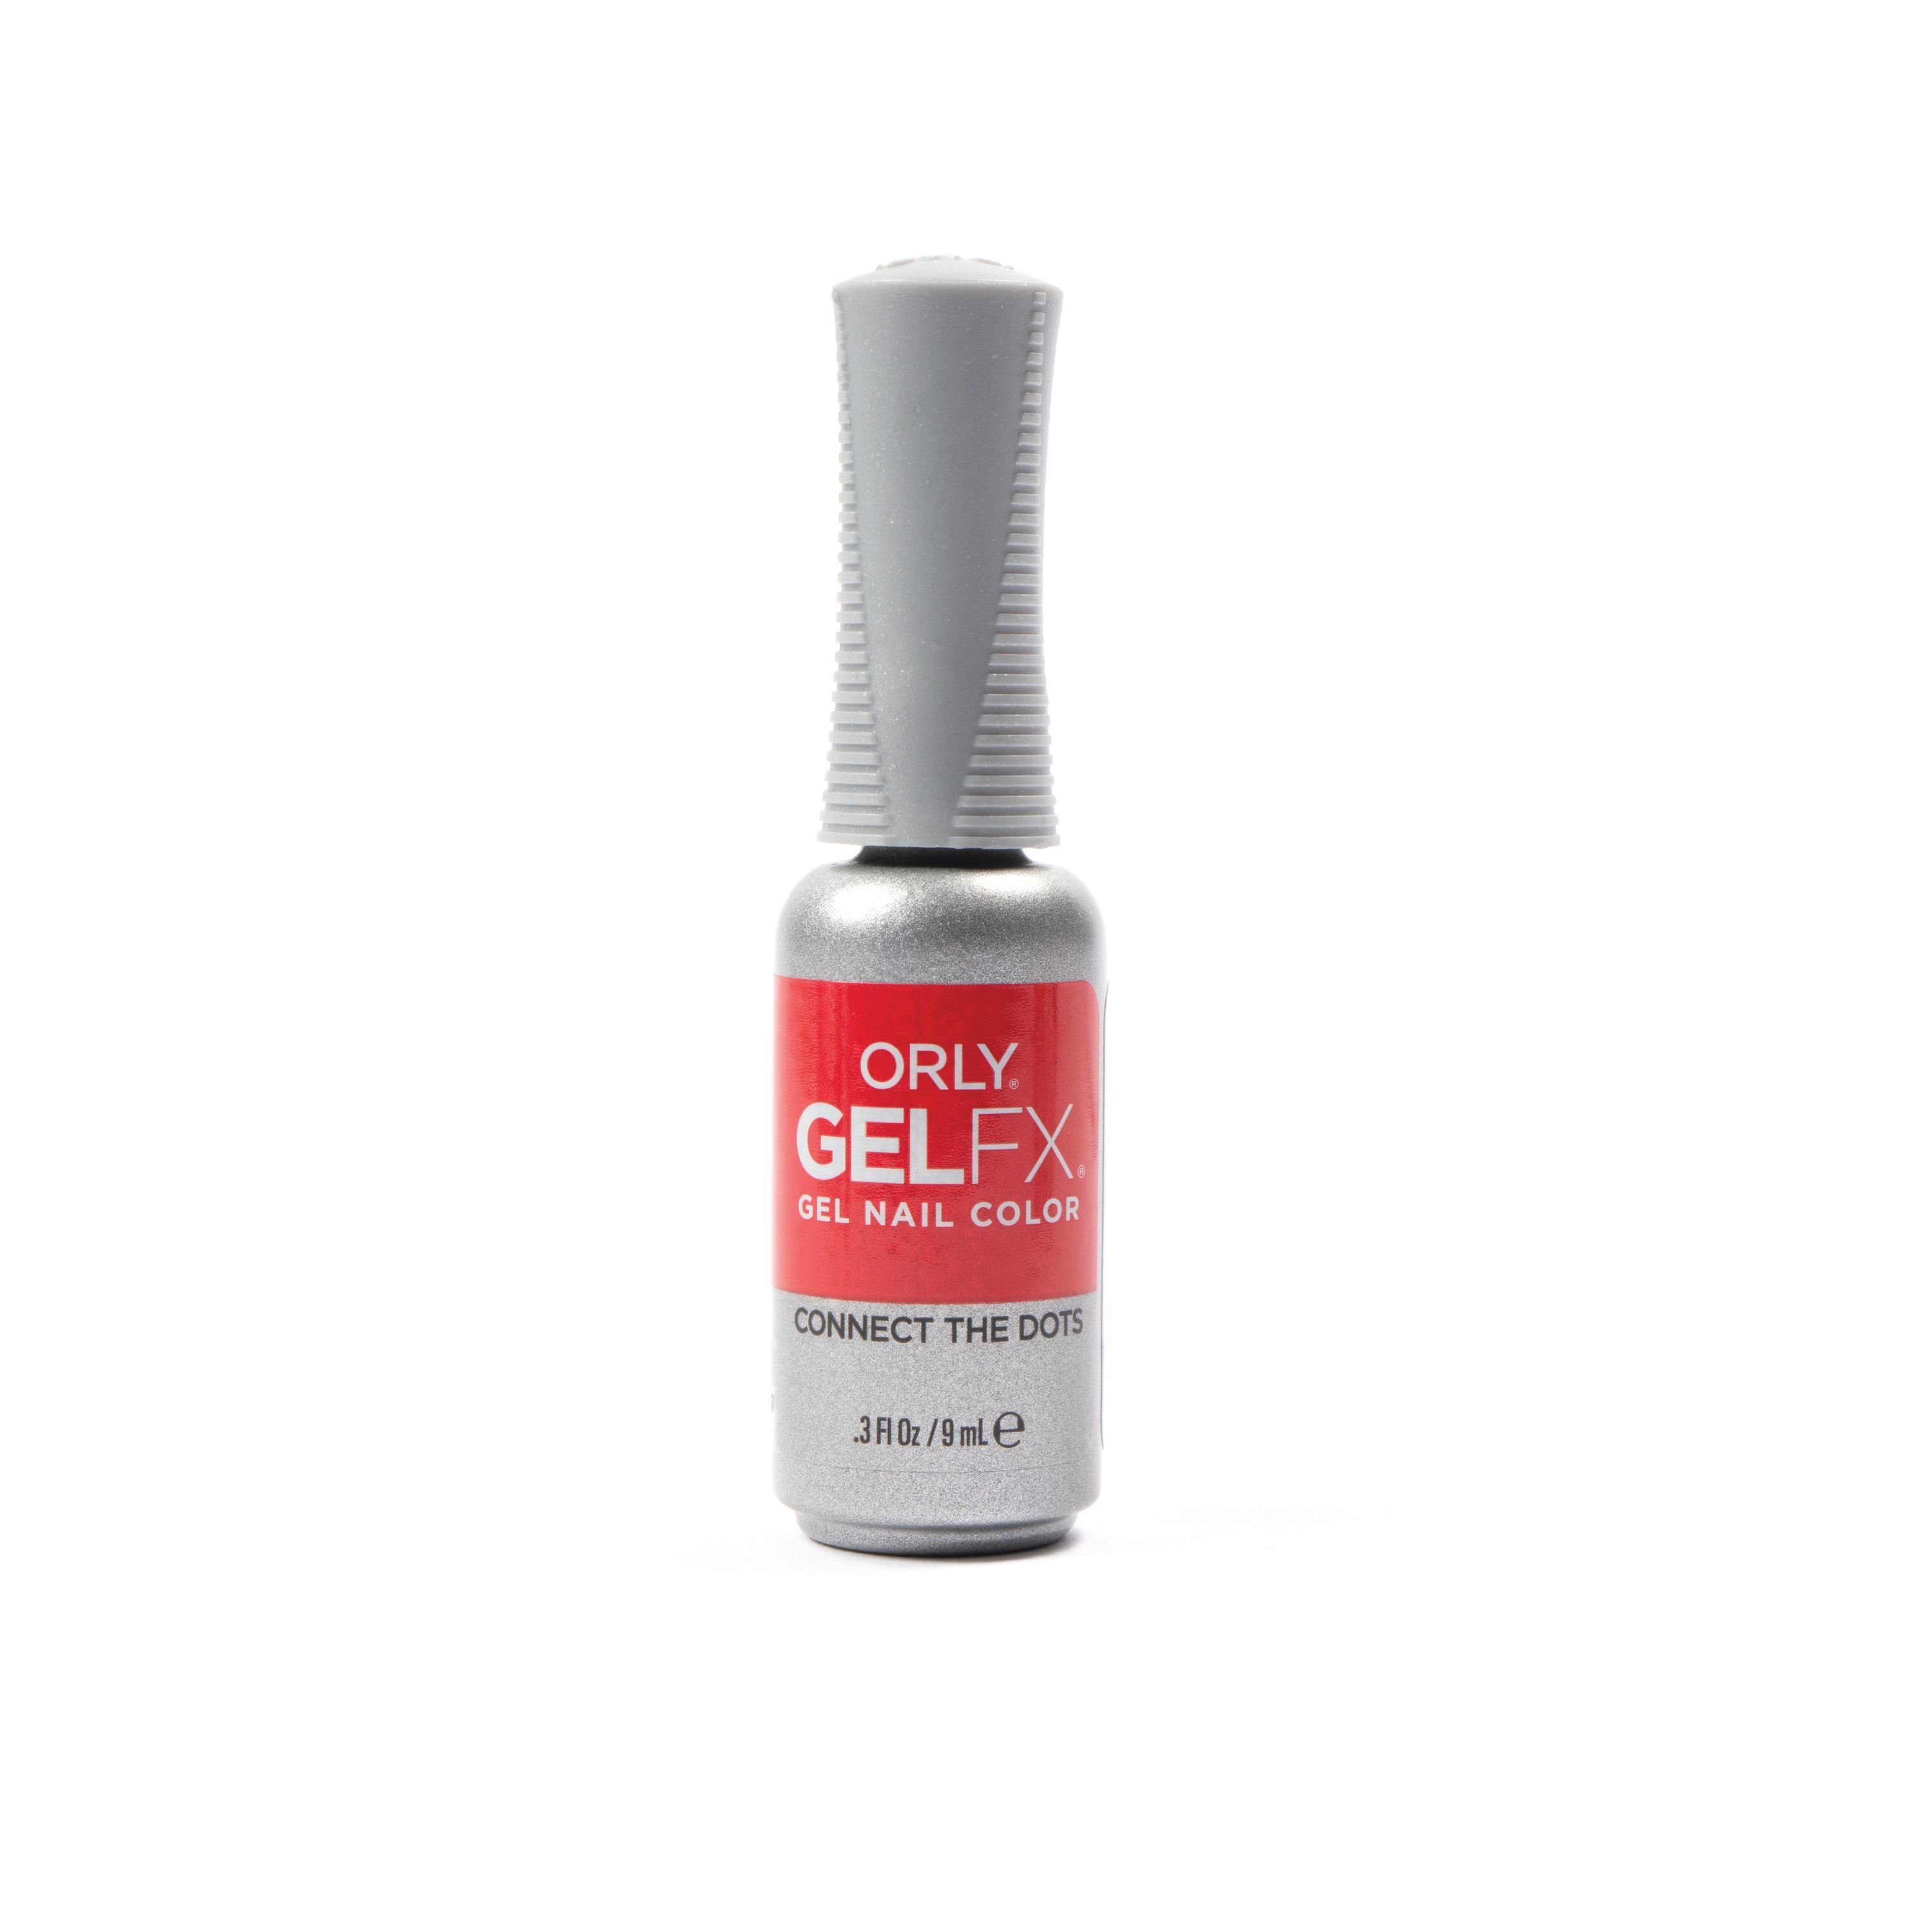 ORLY UV-Nagellack ORLY GEL FX Connect The Dots